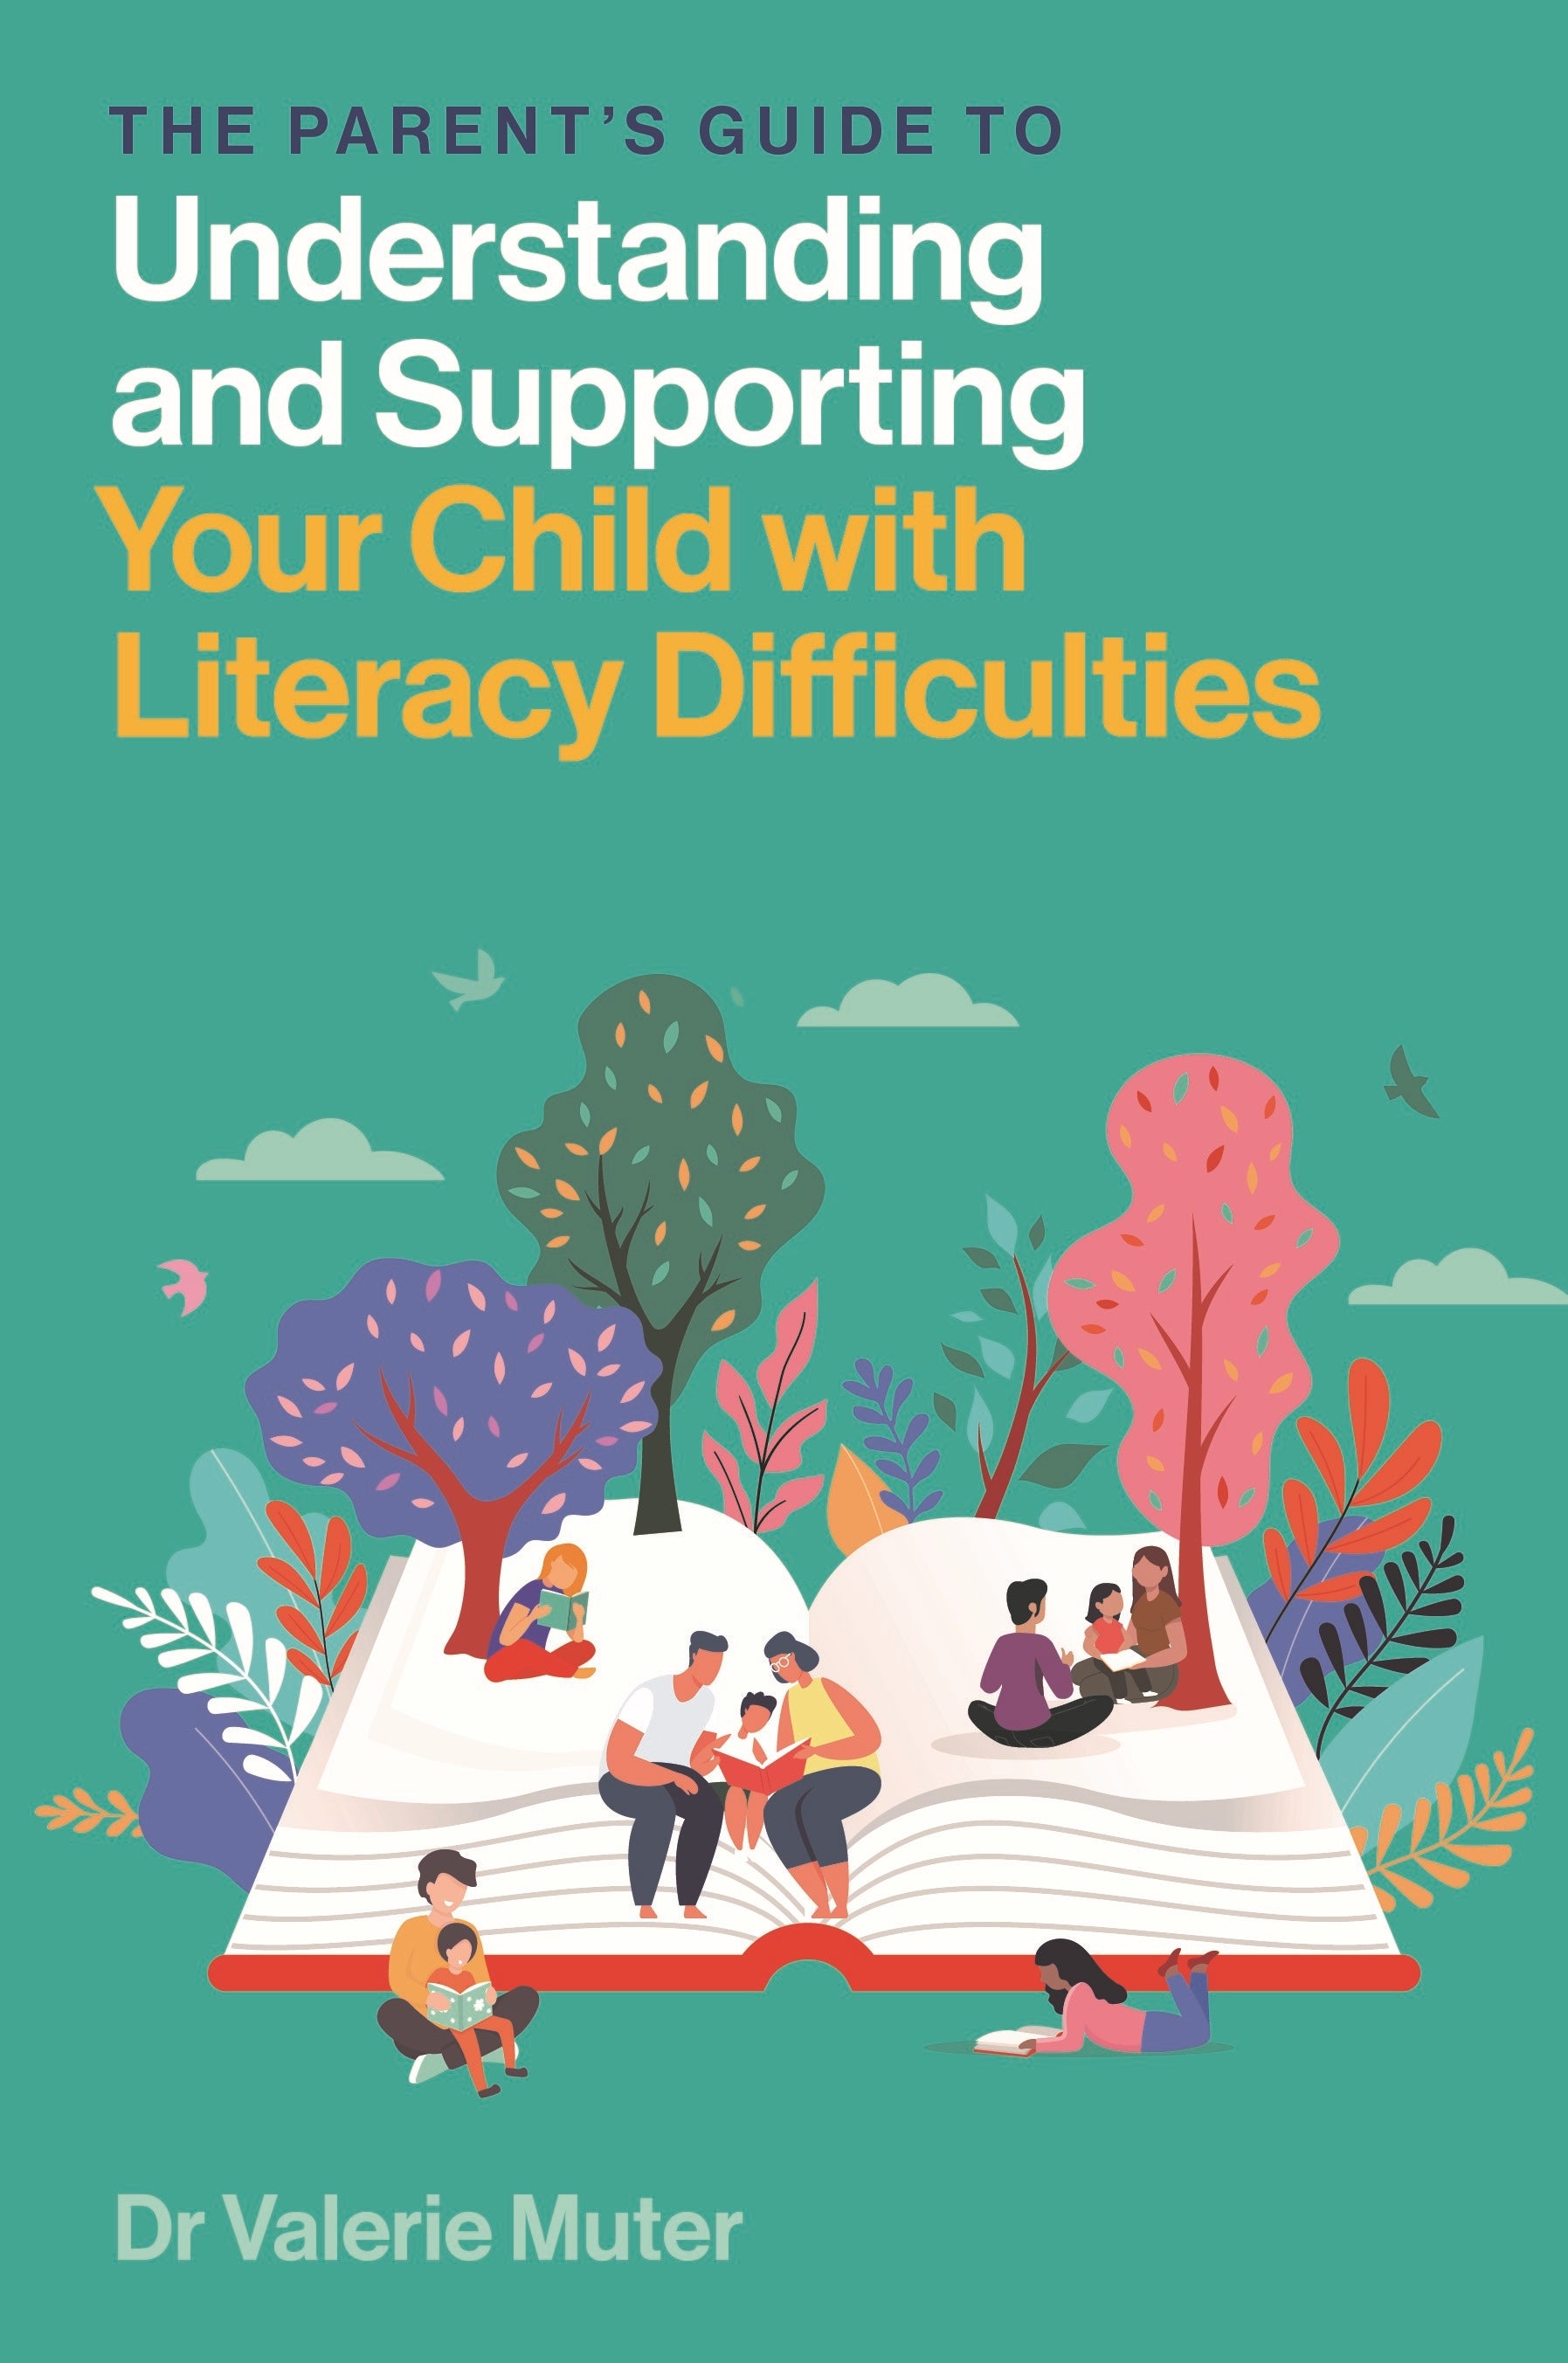 The Parent’s Guide to Understanding and Supporting Your Child with Literacy Difficulties by Valerie Muter